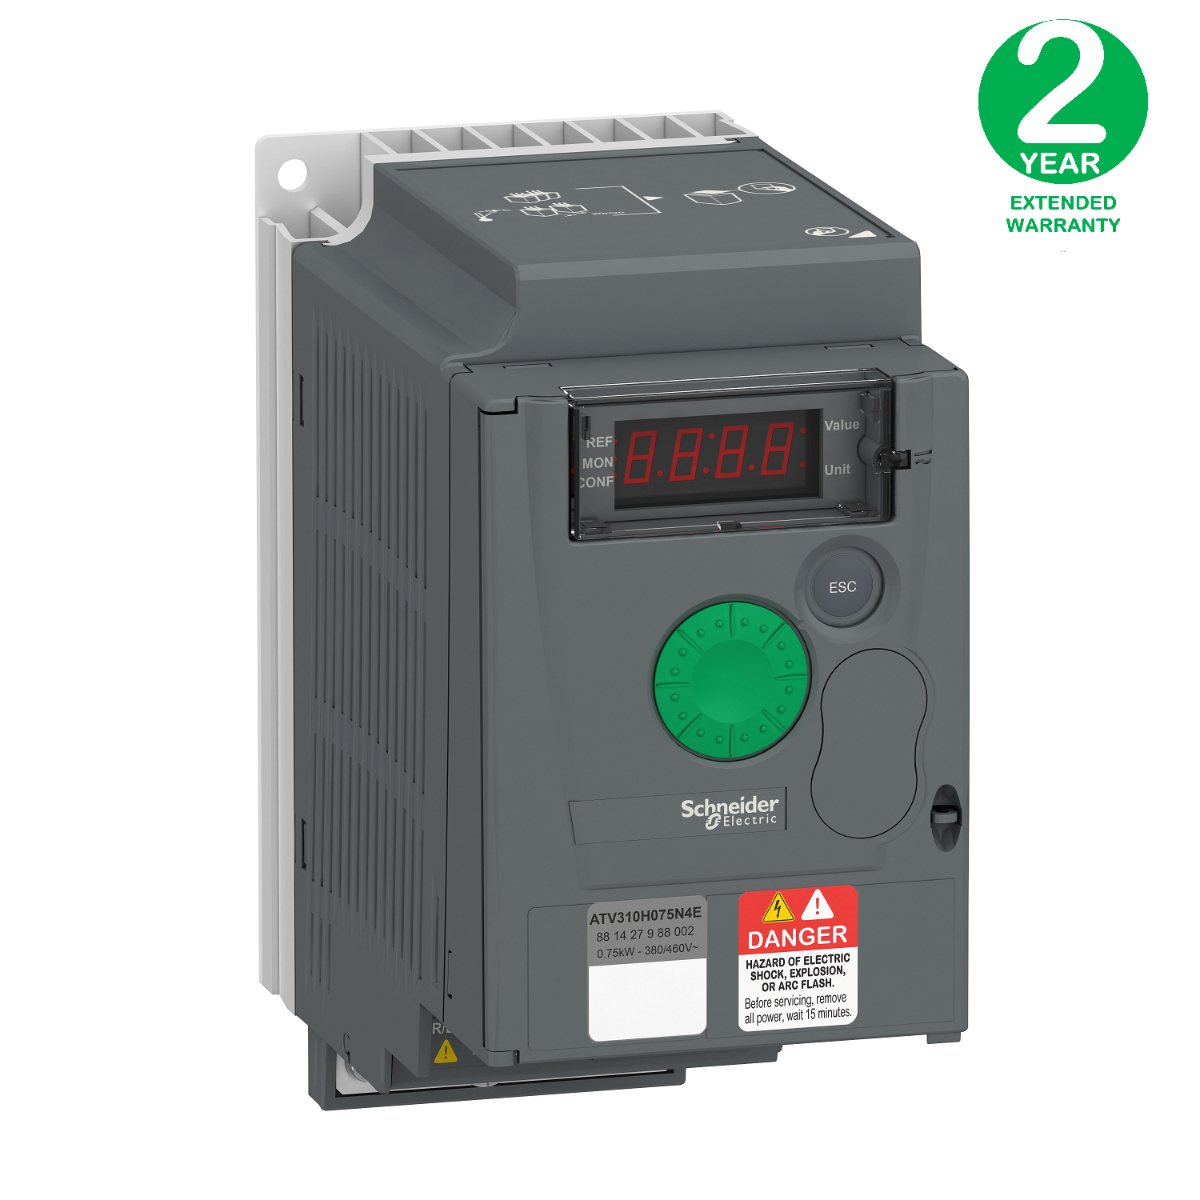 variable speed drive ATV310, 0.75 kW, 1 hp, 380...460 V, 3 phase, without filter + Extended Warranty 2 year